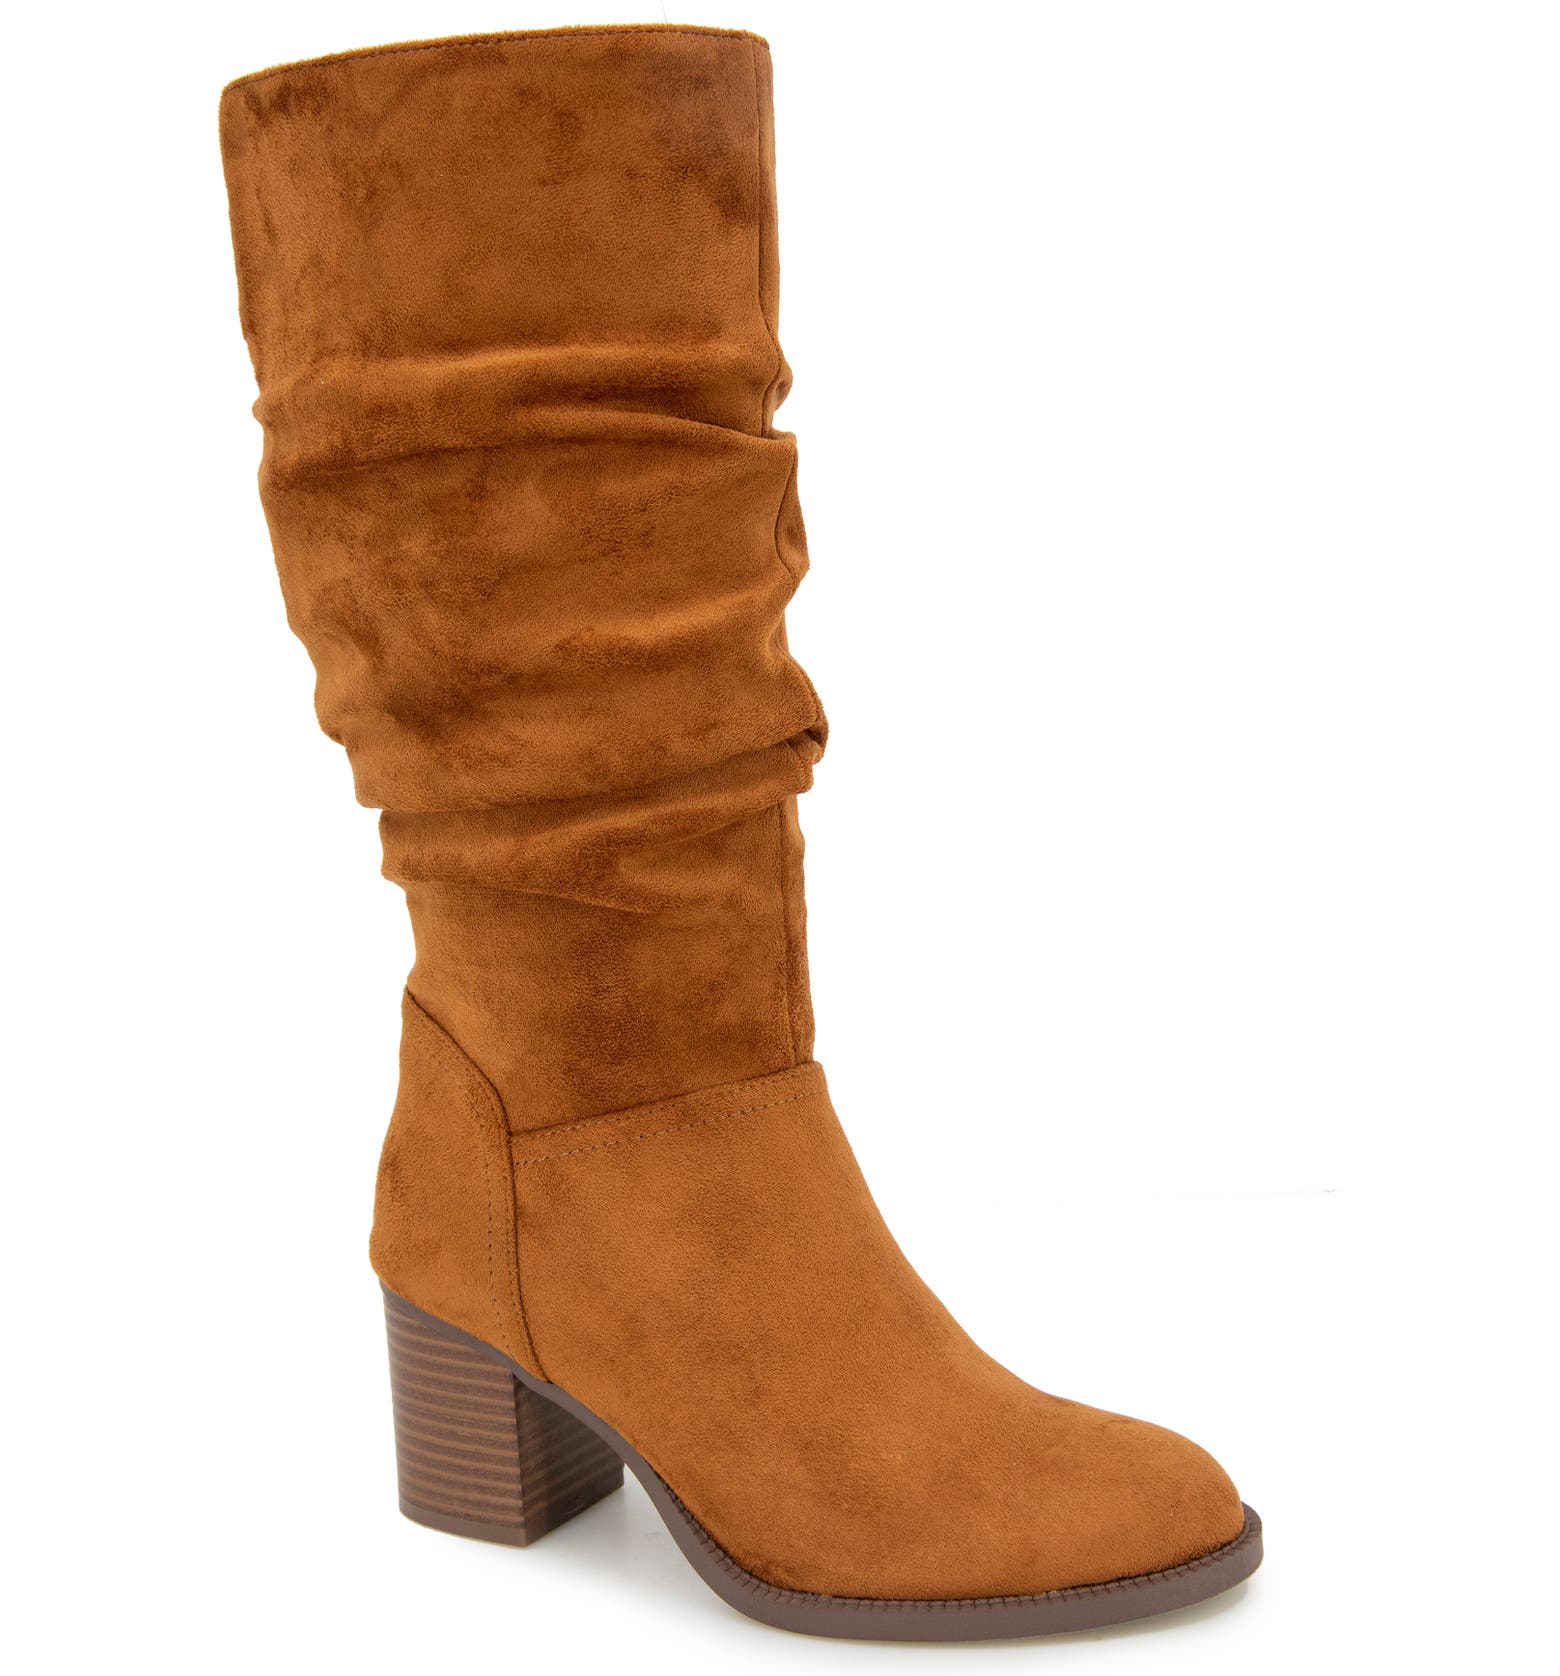 Reaction Kenneth Cole Sonia Ruched Knee High Boot (Women) | Nordstromrack